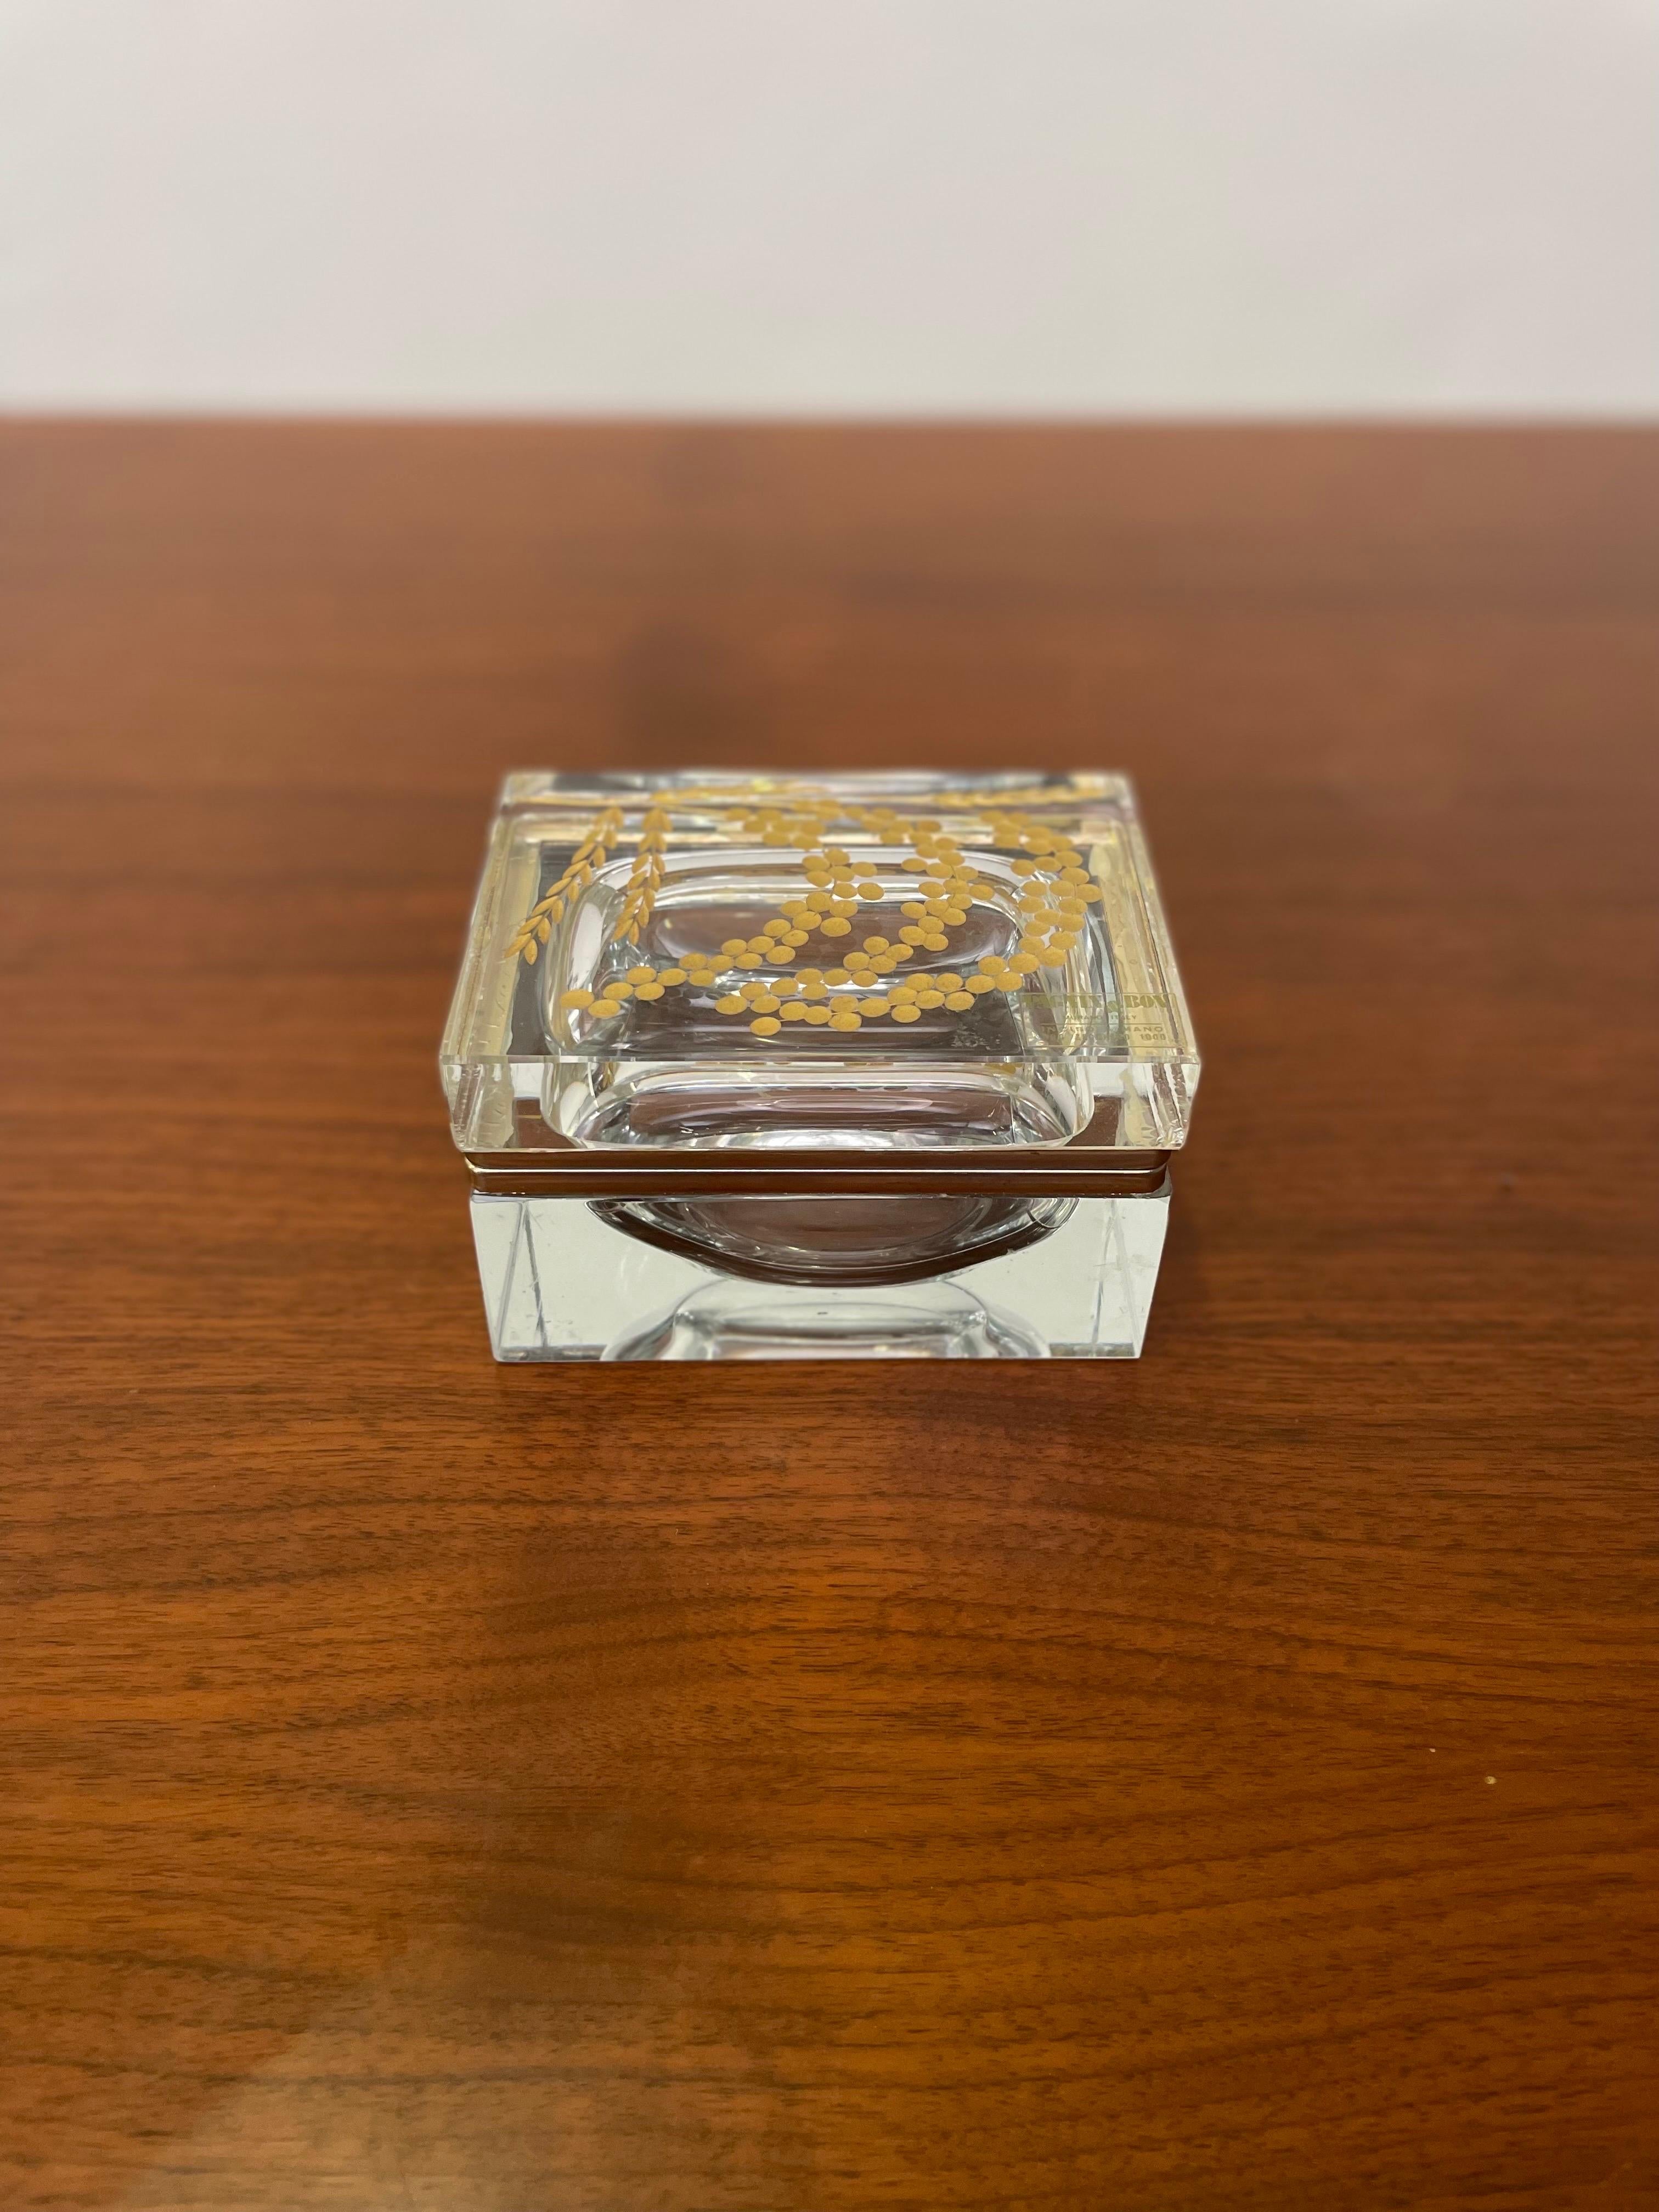 Exquisite Vintage Murano Glass Box by Pagnin & Bon Murano, Gold 24k, 1960s For Sale 5